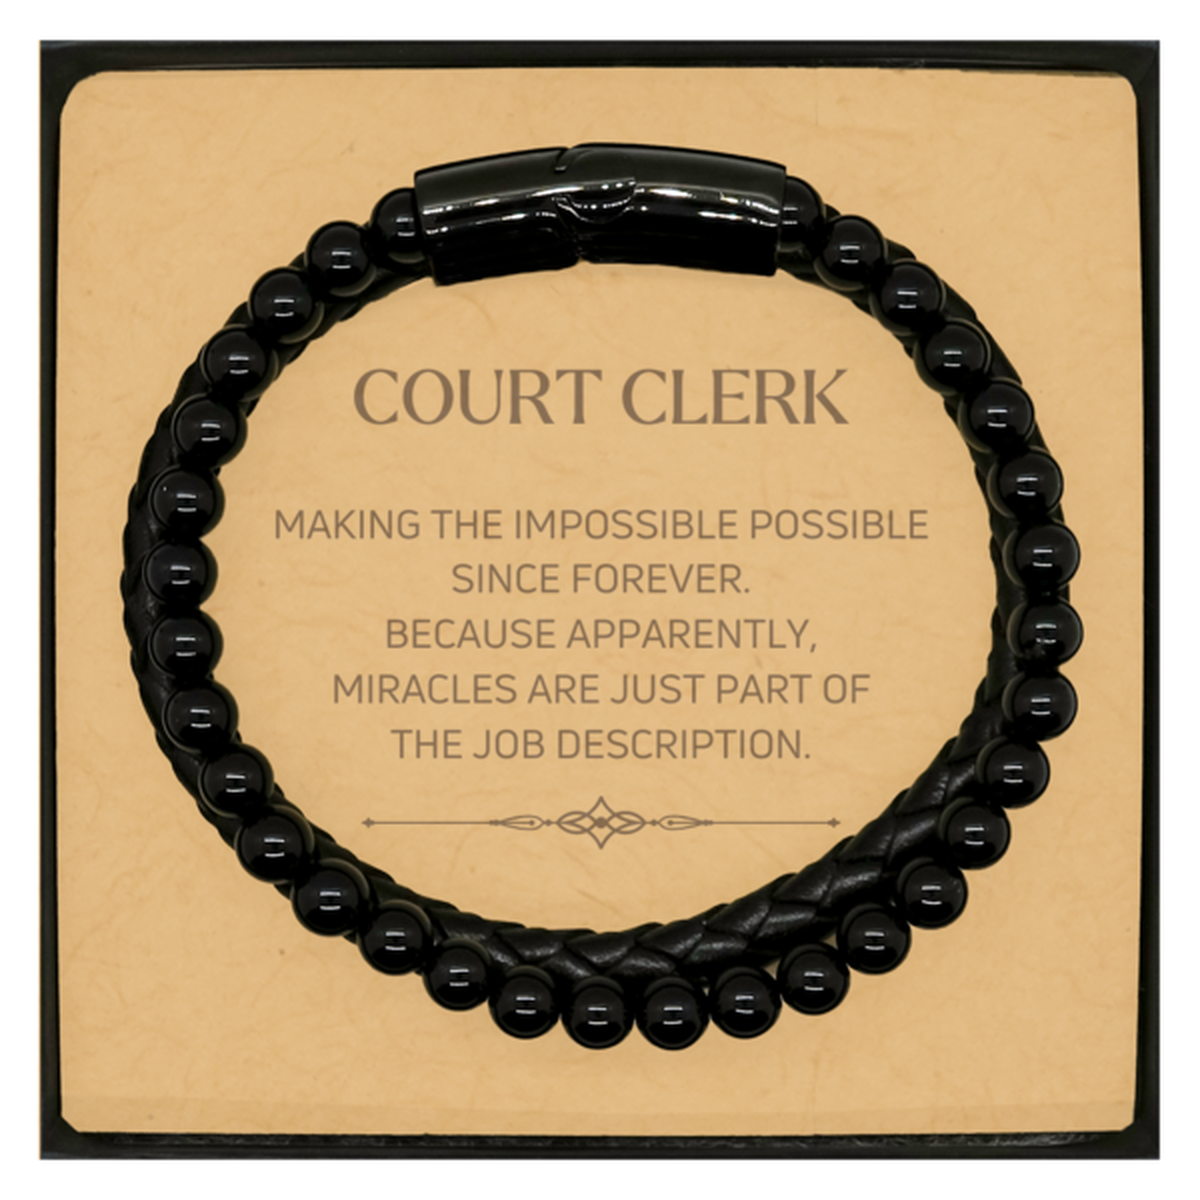 Funny Court Clerk Gifts, Miracles are just part of the job description, Inspirational Birthday Christmas Stone Leather Bracelets For Court Clerk, Men, Women, Coworkers, Friends, Boss